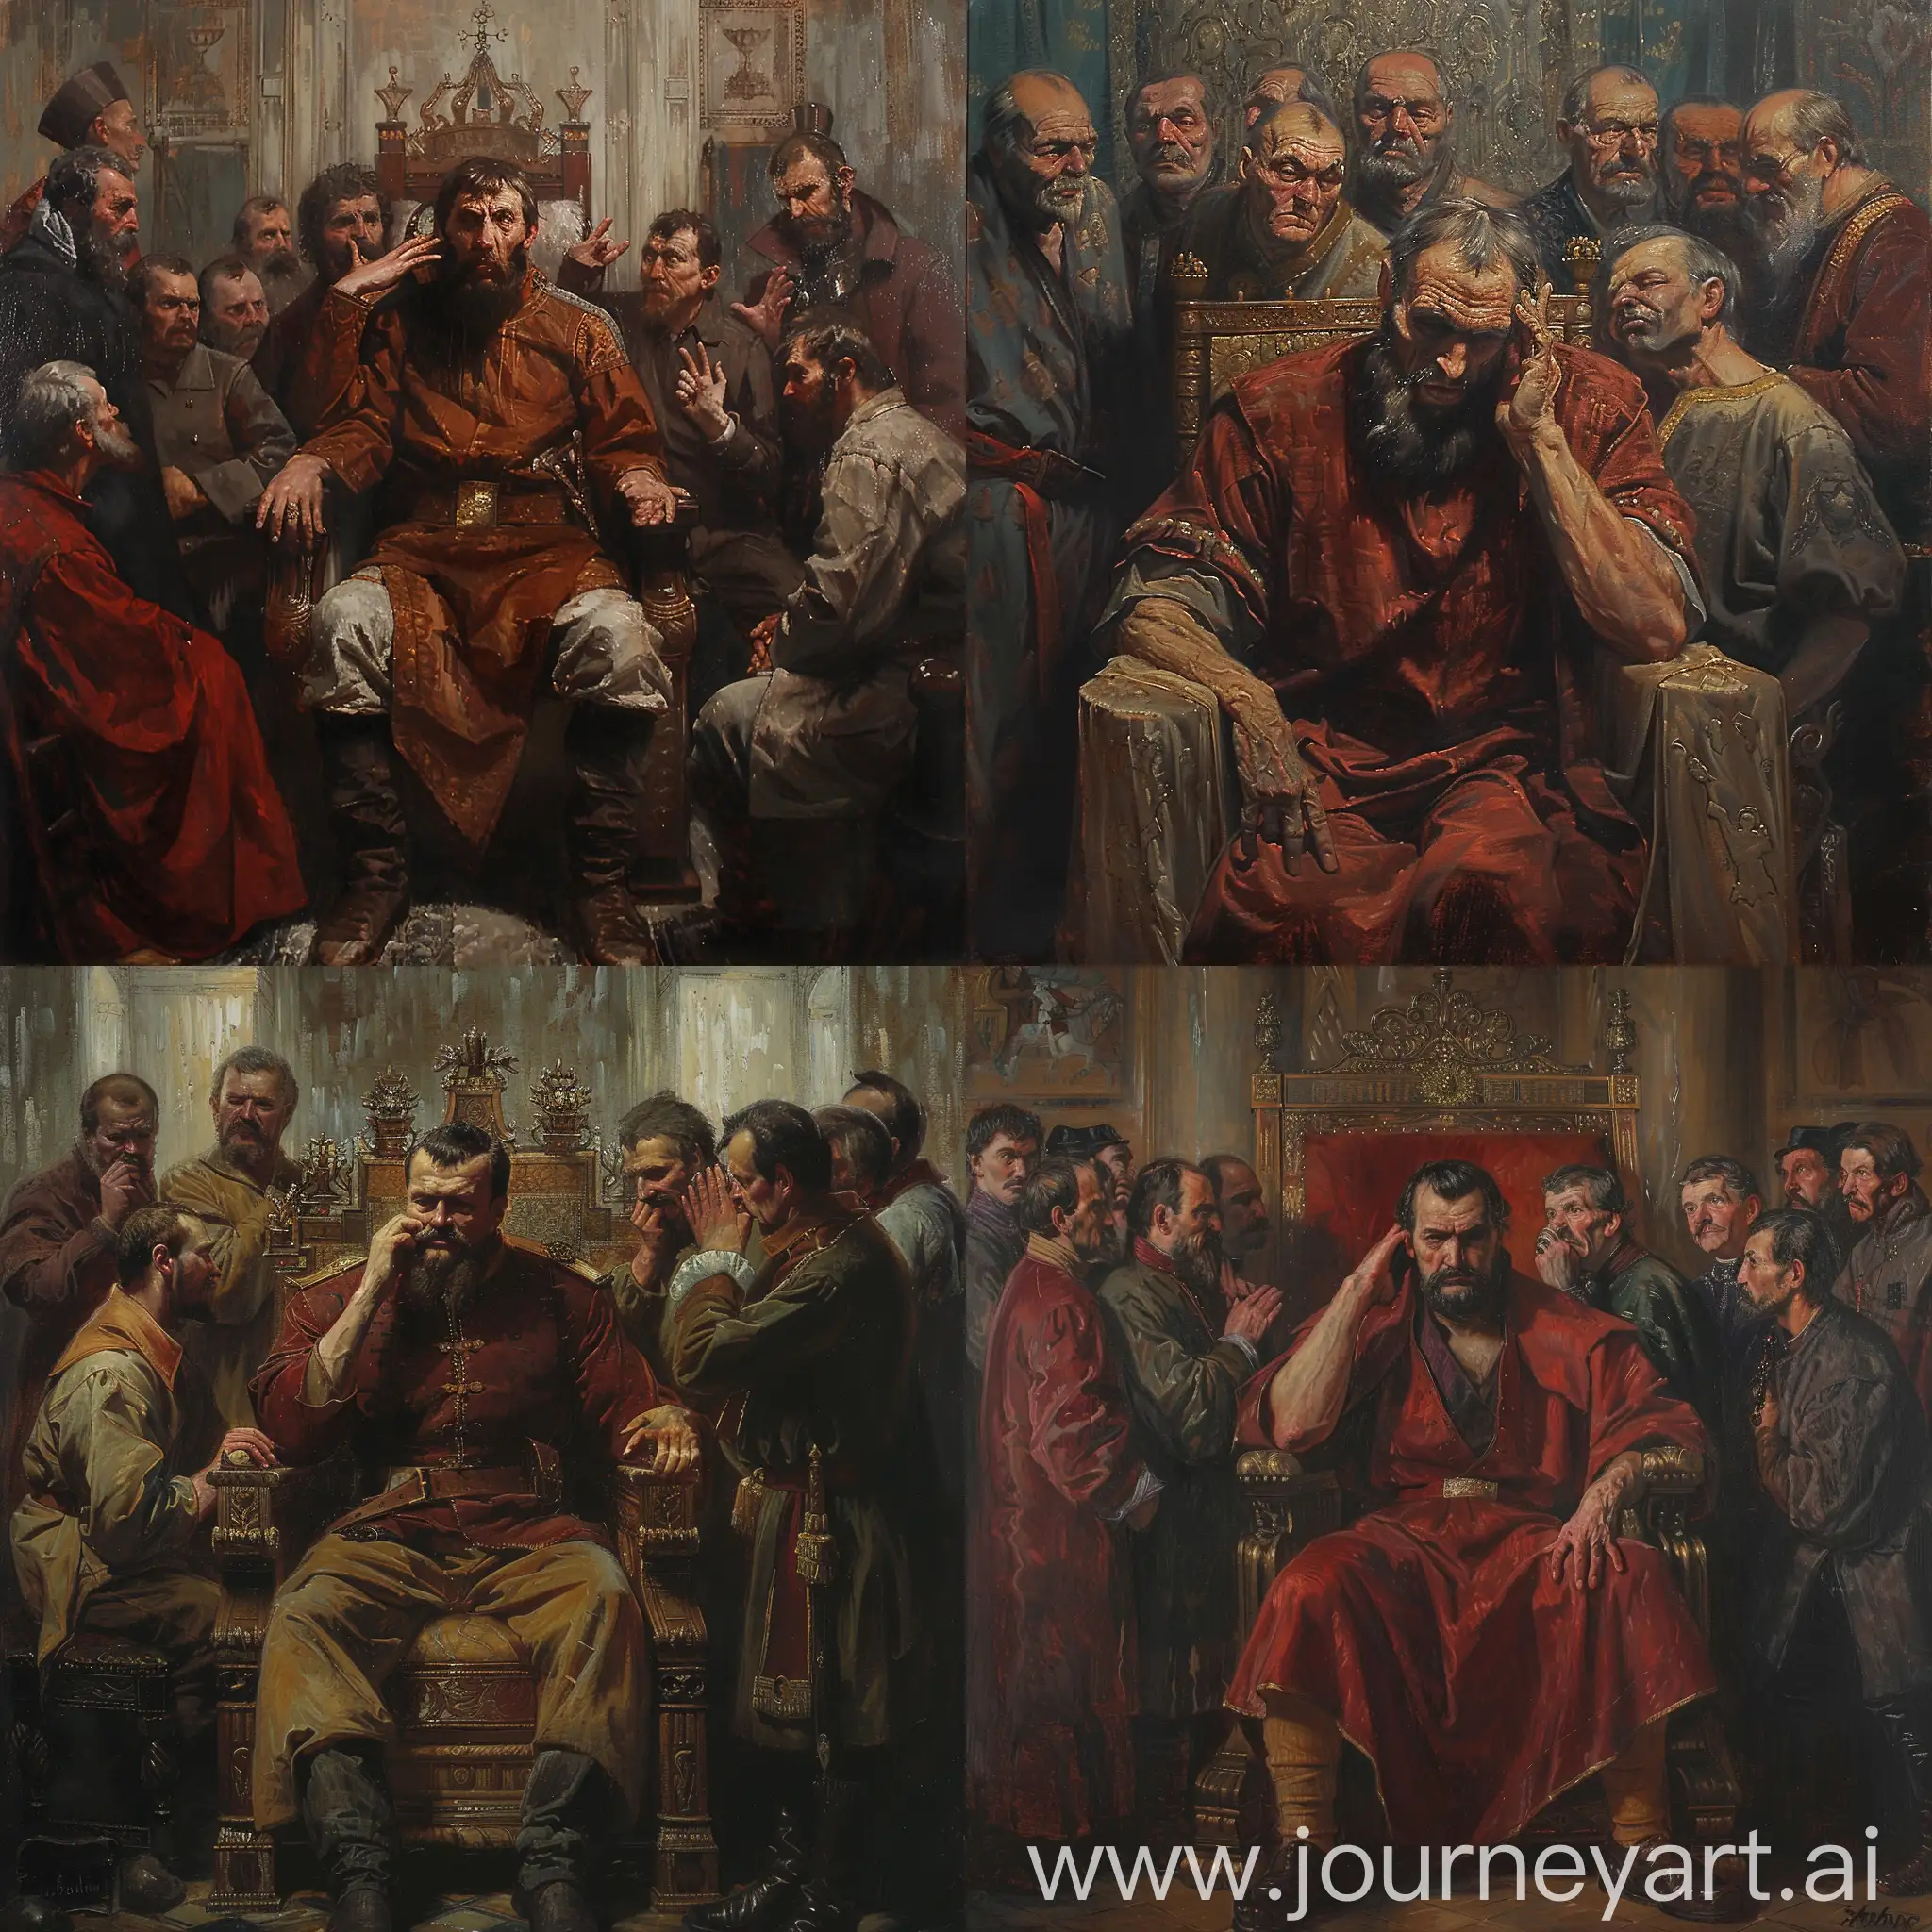 An oil painting depicting Ivan the Terrible sitting on his throne, his expression a mix of power and cruelty, surrounded by advisors whispering in his ear, while in the background, the walls of the palace seem to echo with the weight of his tyrannical rule.